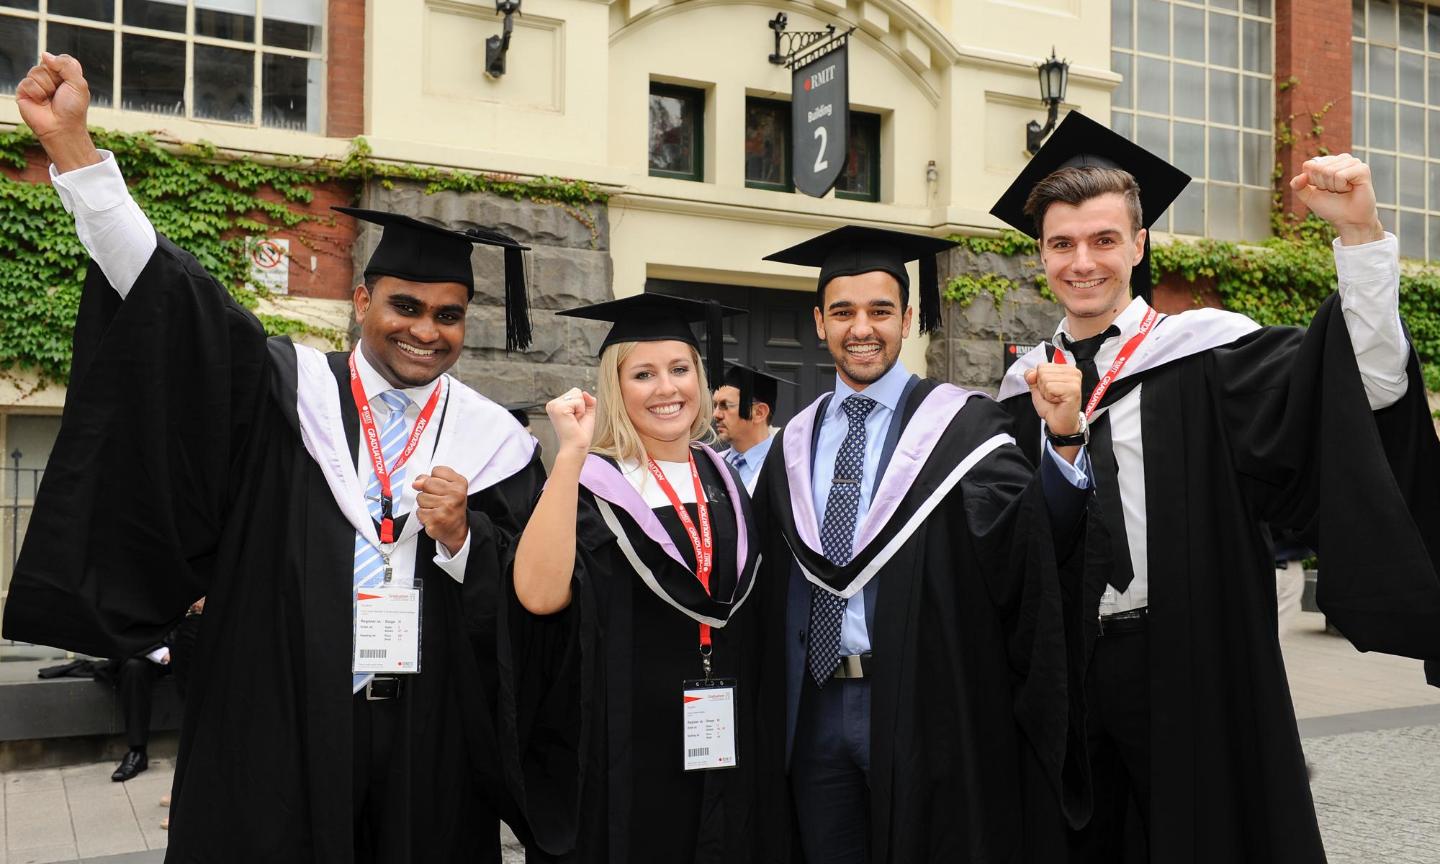 Happy students wearing academic gowns